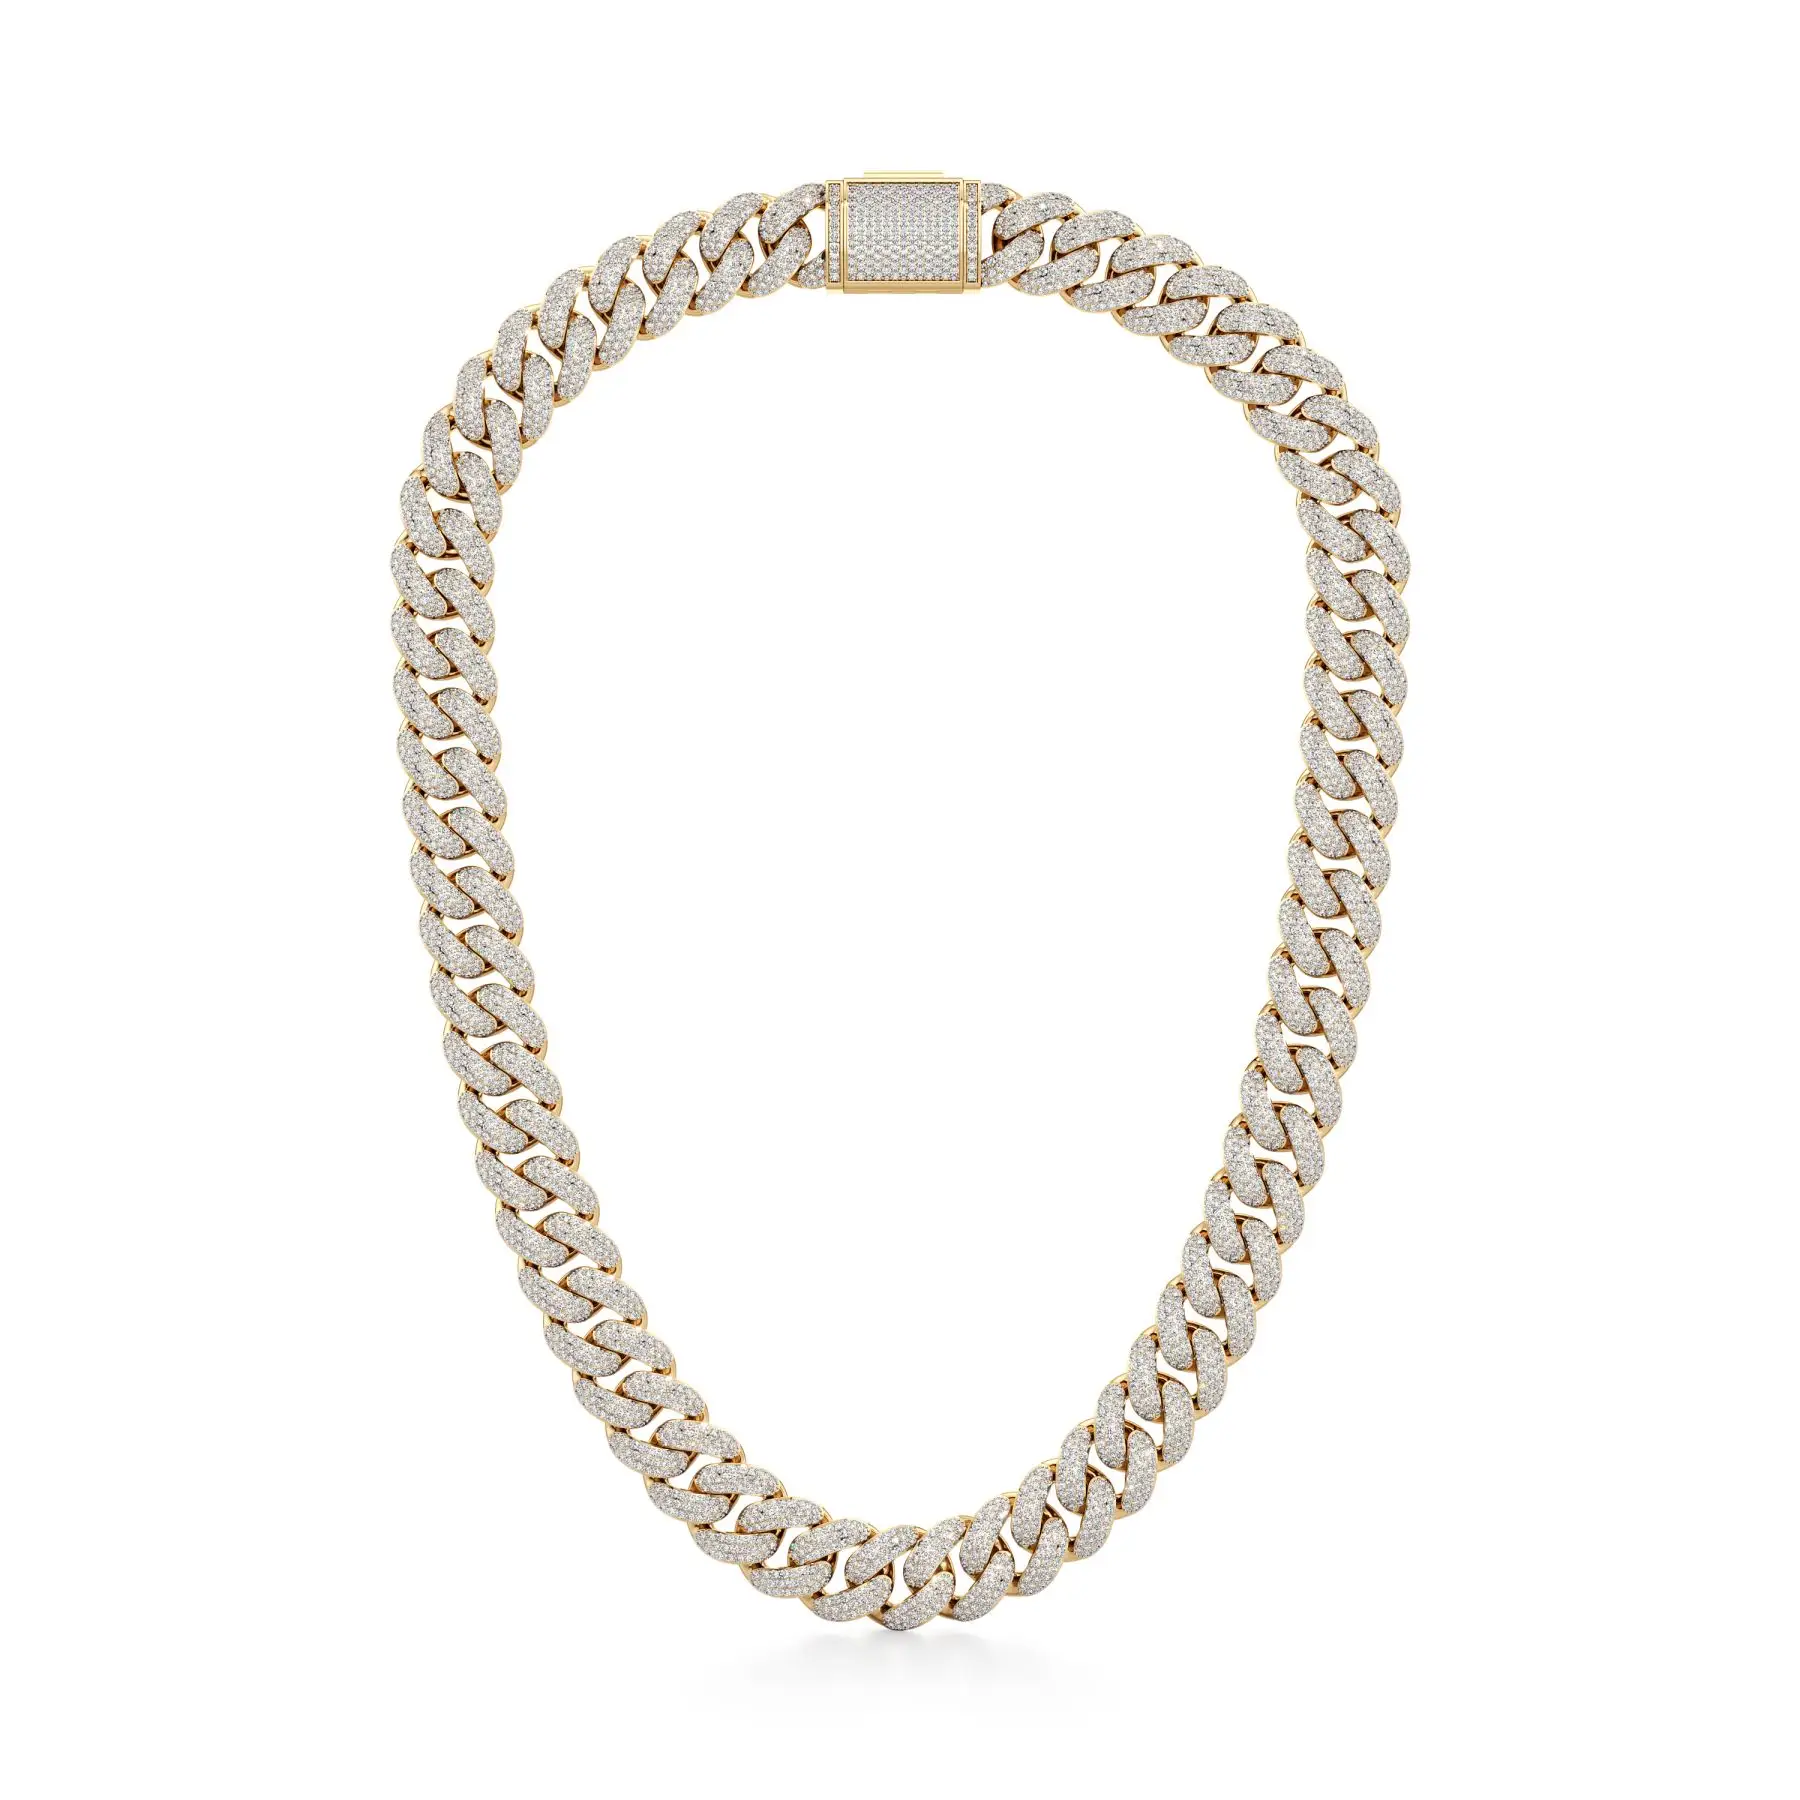 Celebrated Shine Diamond Necklace in Yellow 10k Gold